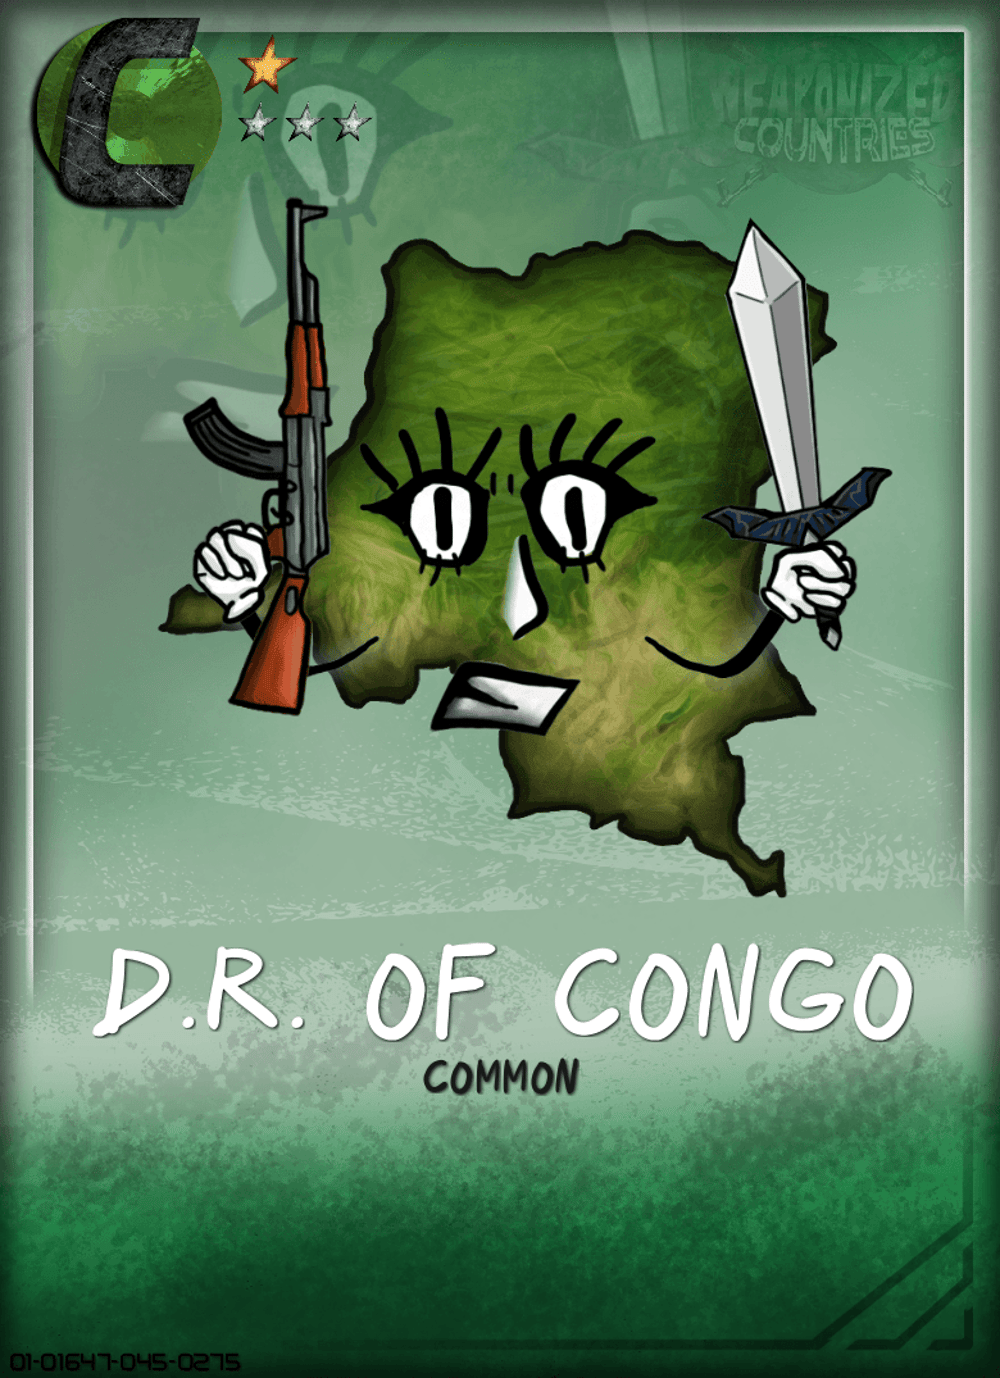 Weaponized Countries #1647 D.r. Of Congo